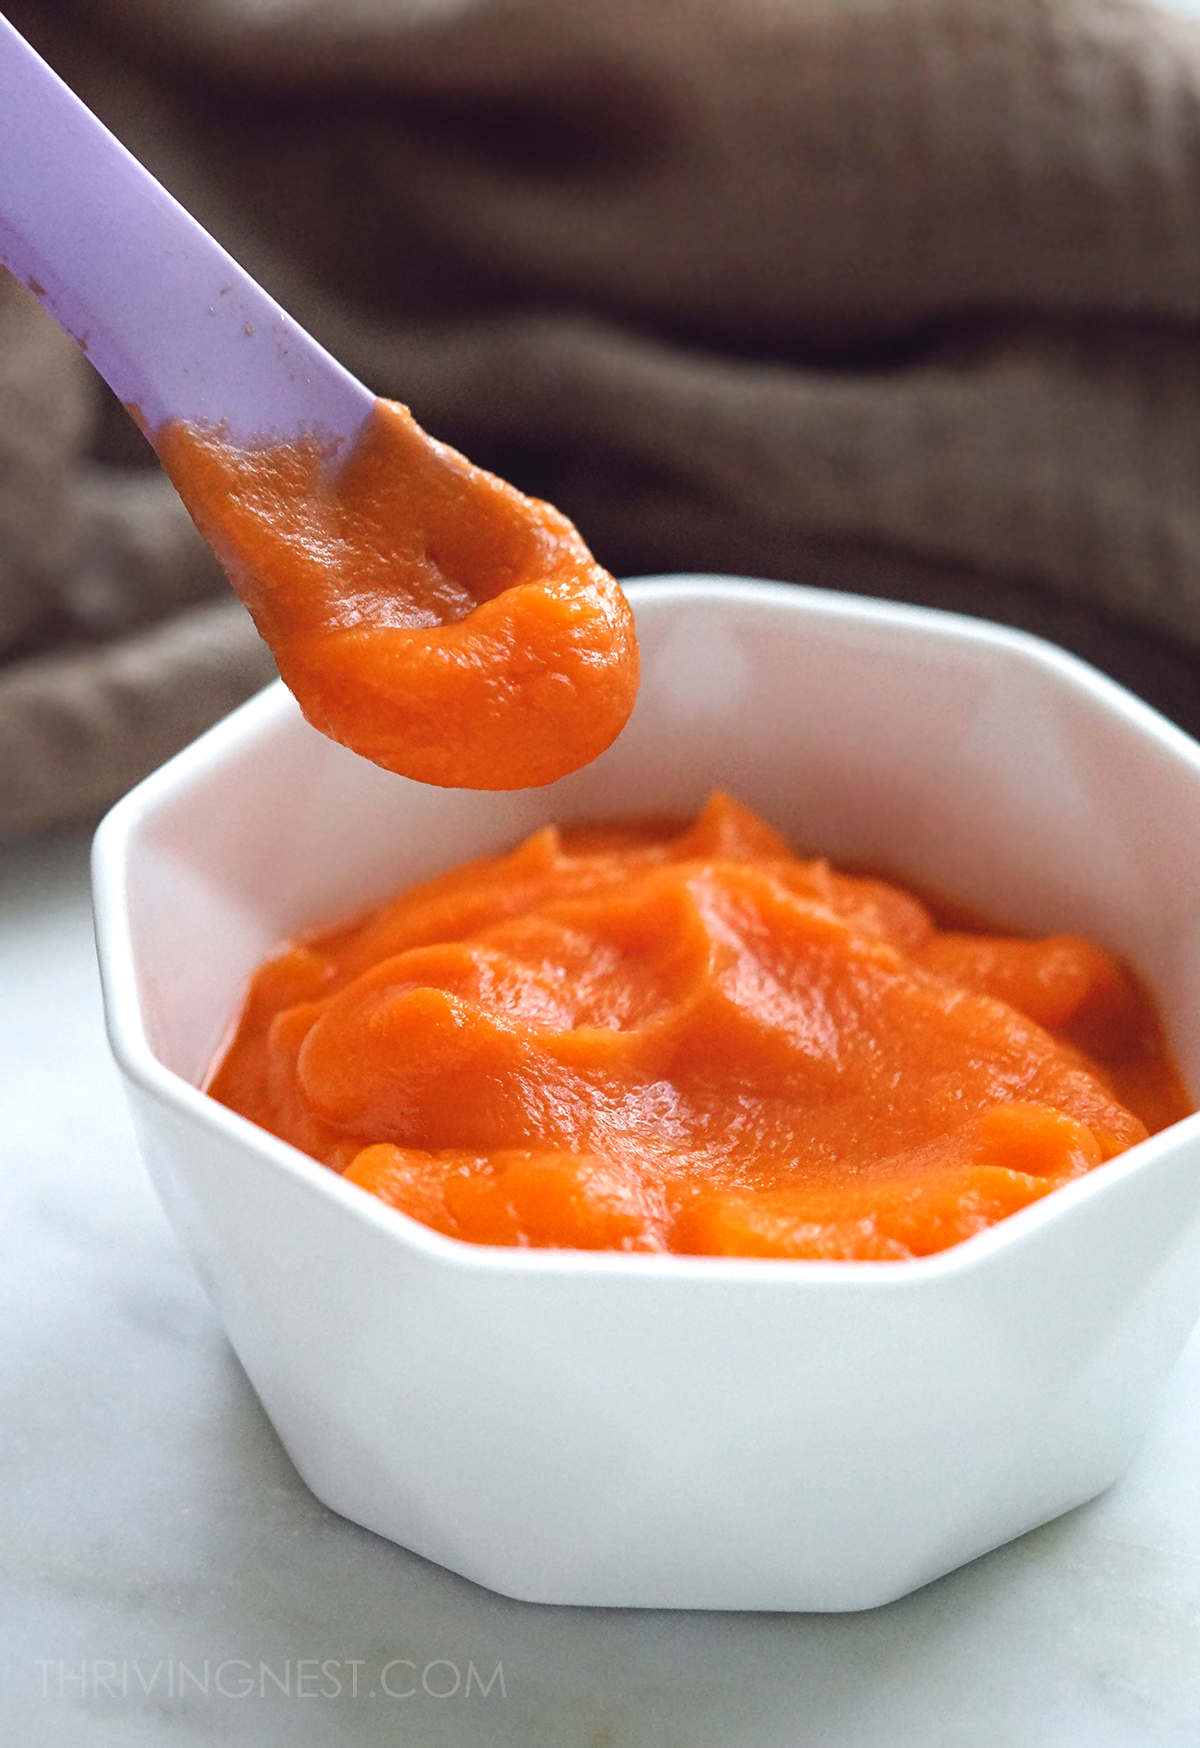 Baby carrot puree (6 months+), how to puree carrots for baby with different textures by age.